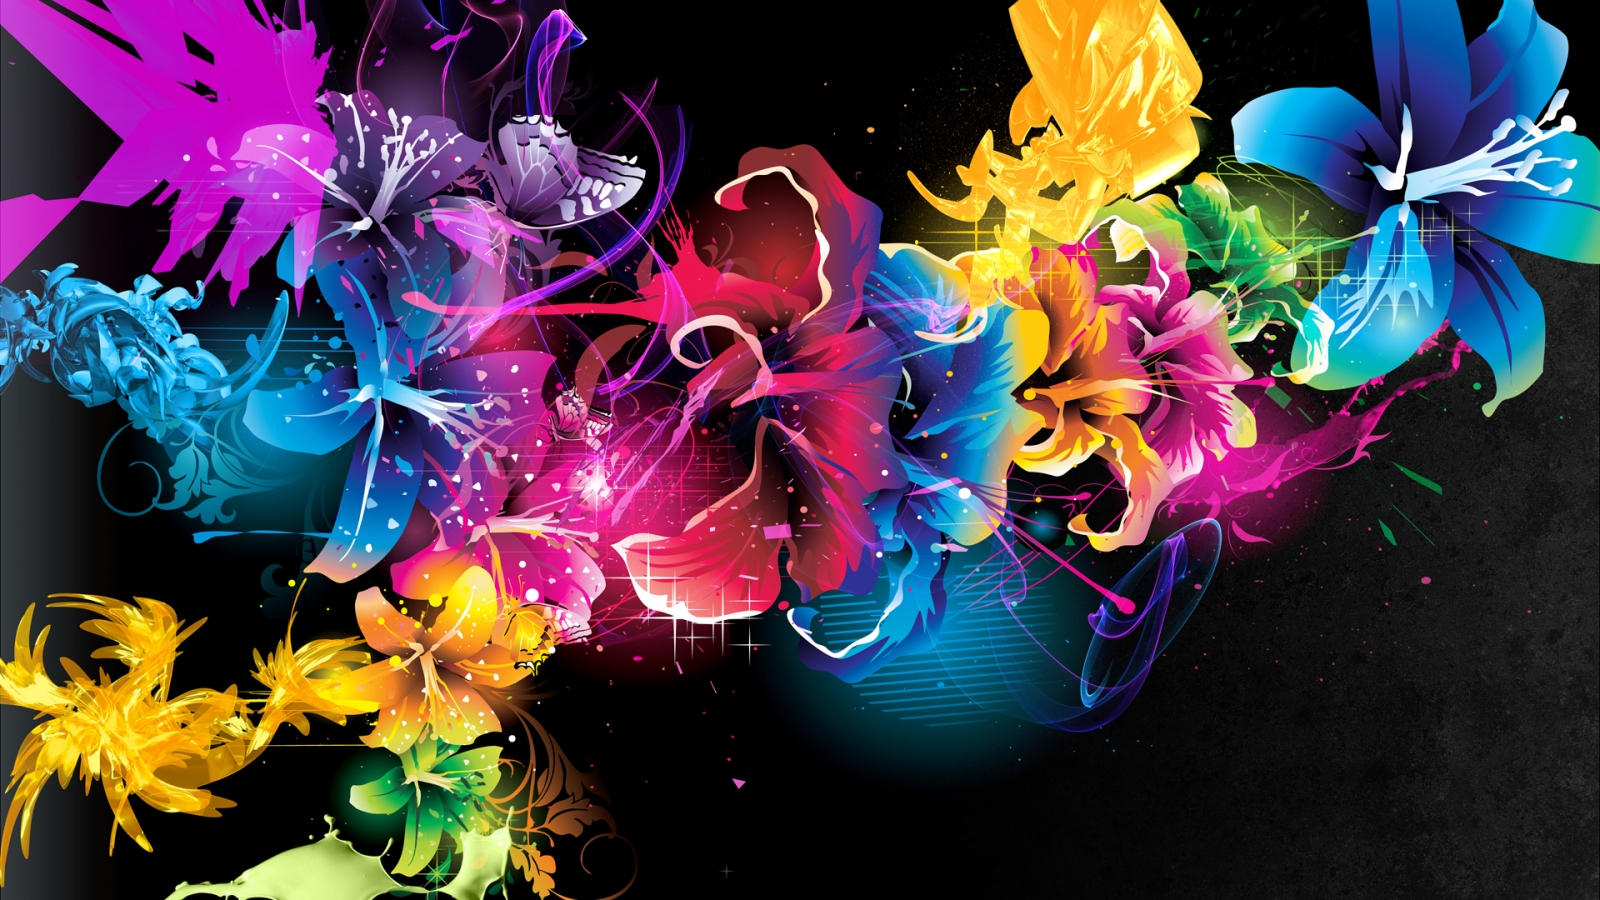 Beautiful Fractal Flowers for 1600 x 900 HDTV resolution